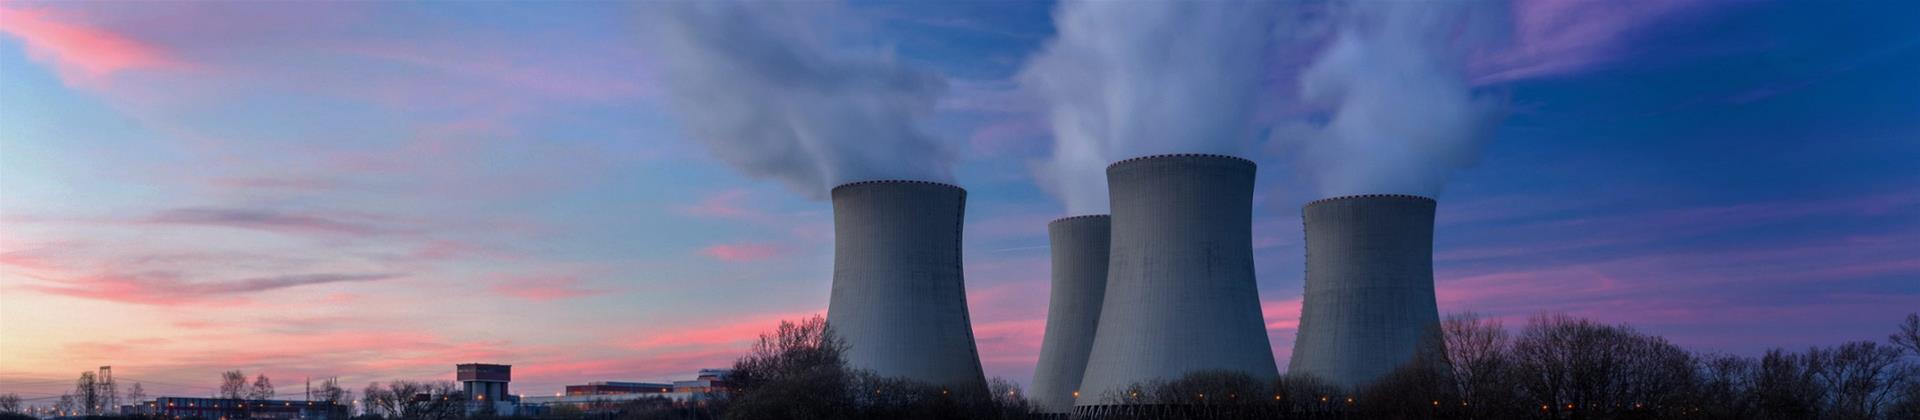 Cooling towers emitting steam are a reminder of the importance of pure water in the power generation industry.